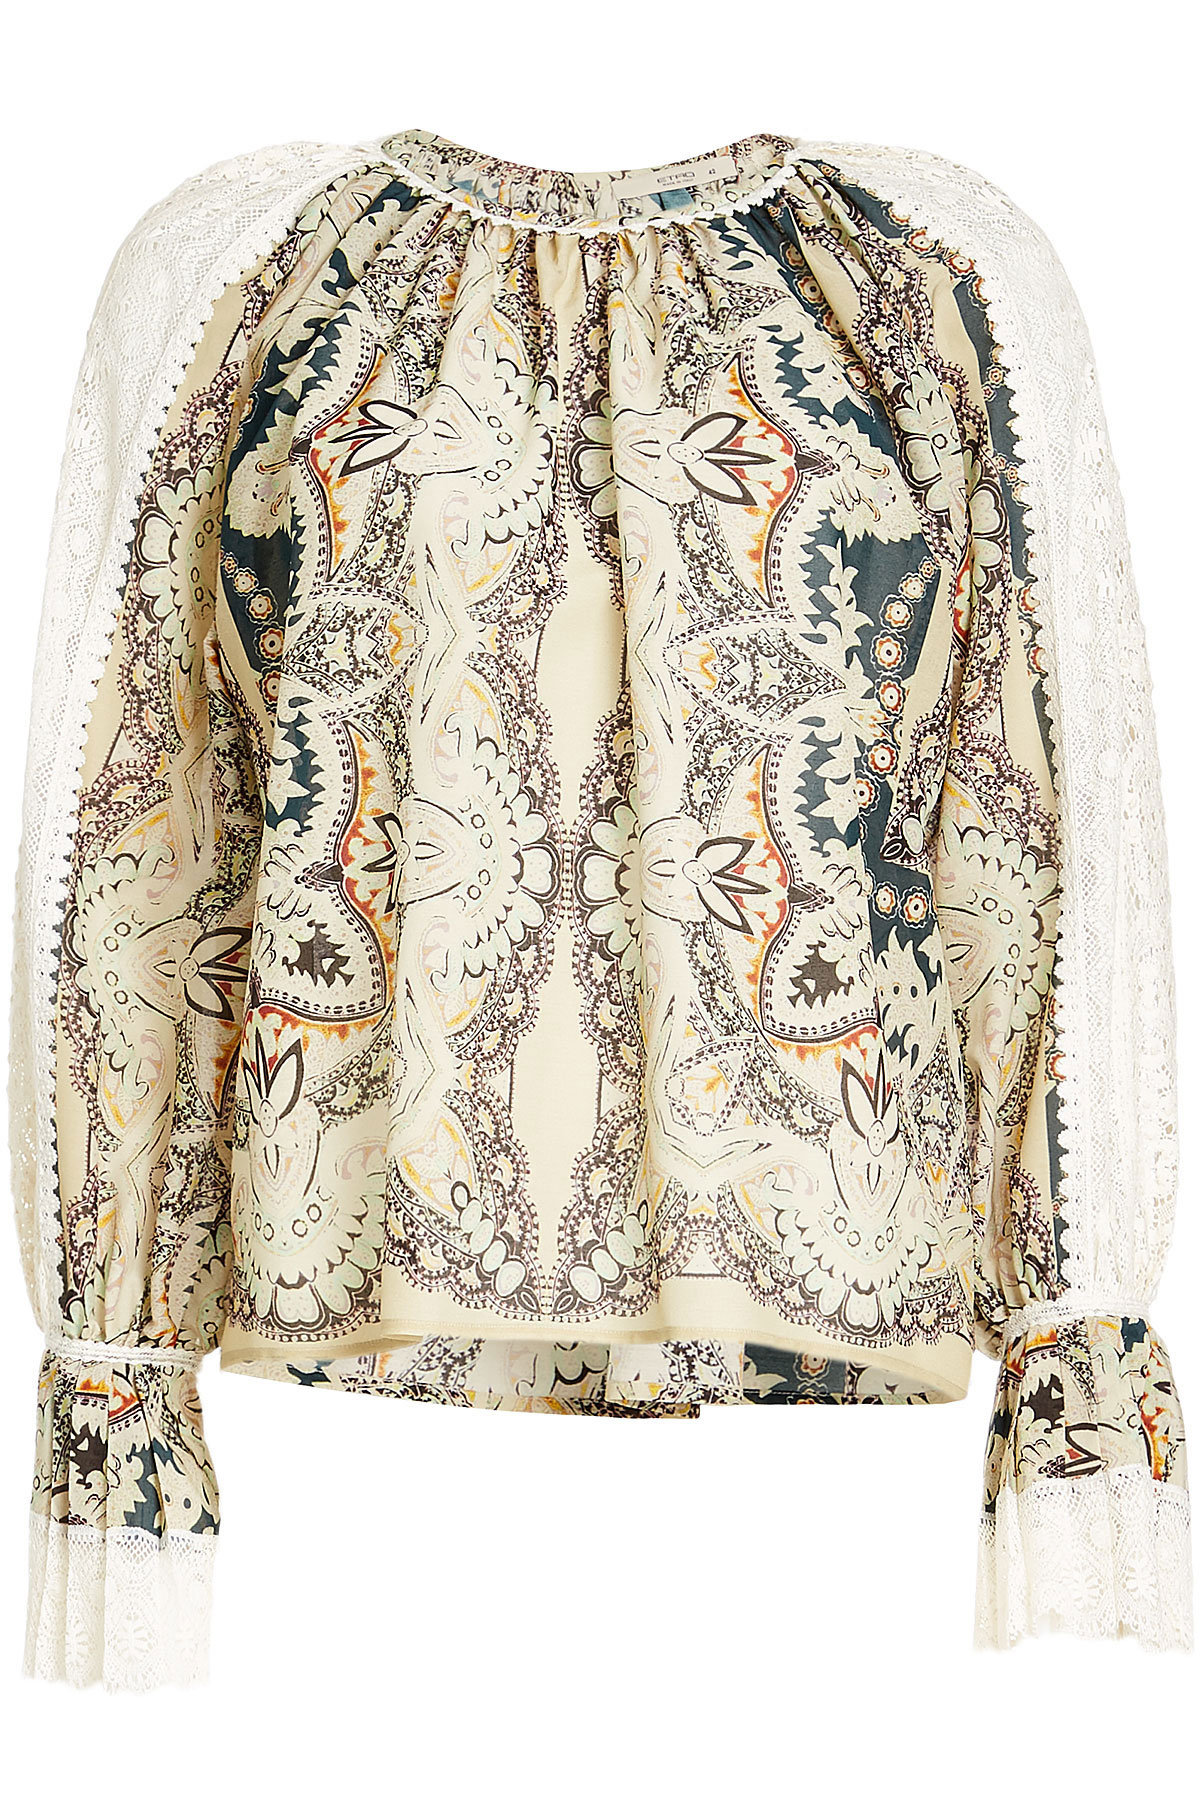 Etro - Printed Cotton and Silk Blouse with Lace